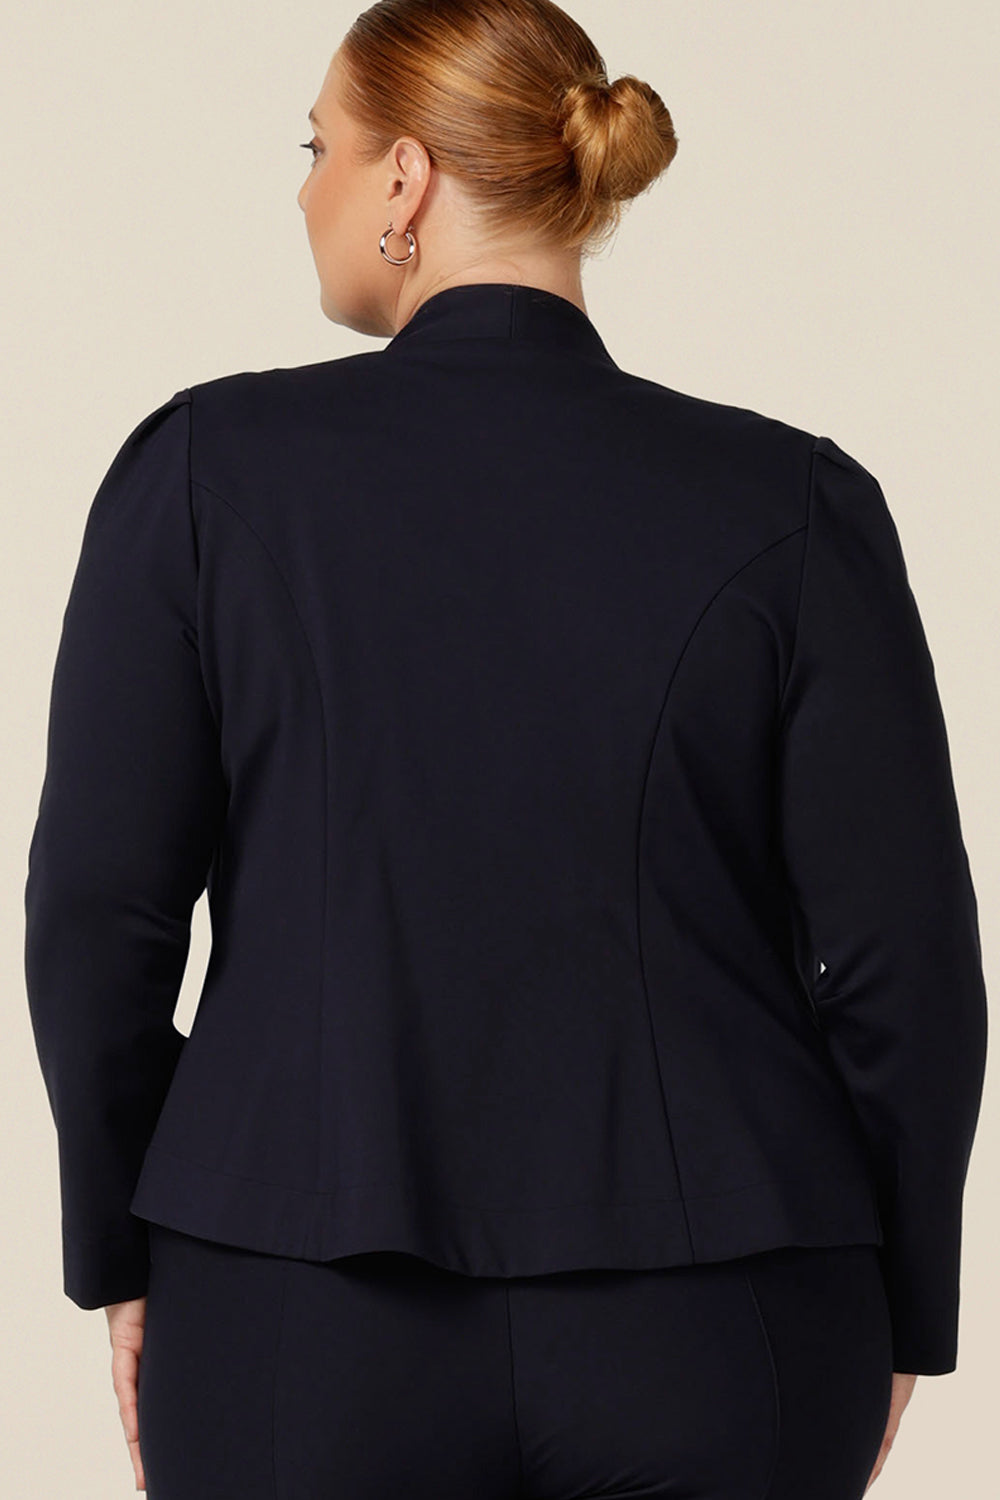 Back view of a size 18, fuller figure woman wearing a soft tailored navy jacket with navy work wear pants. Made in Australia for petite to plus sizes, the stretch ponte jersey is well-fitting on womanly curves.